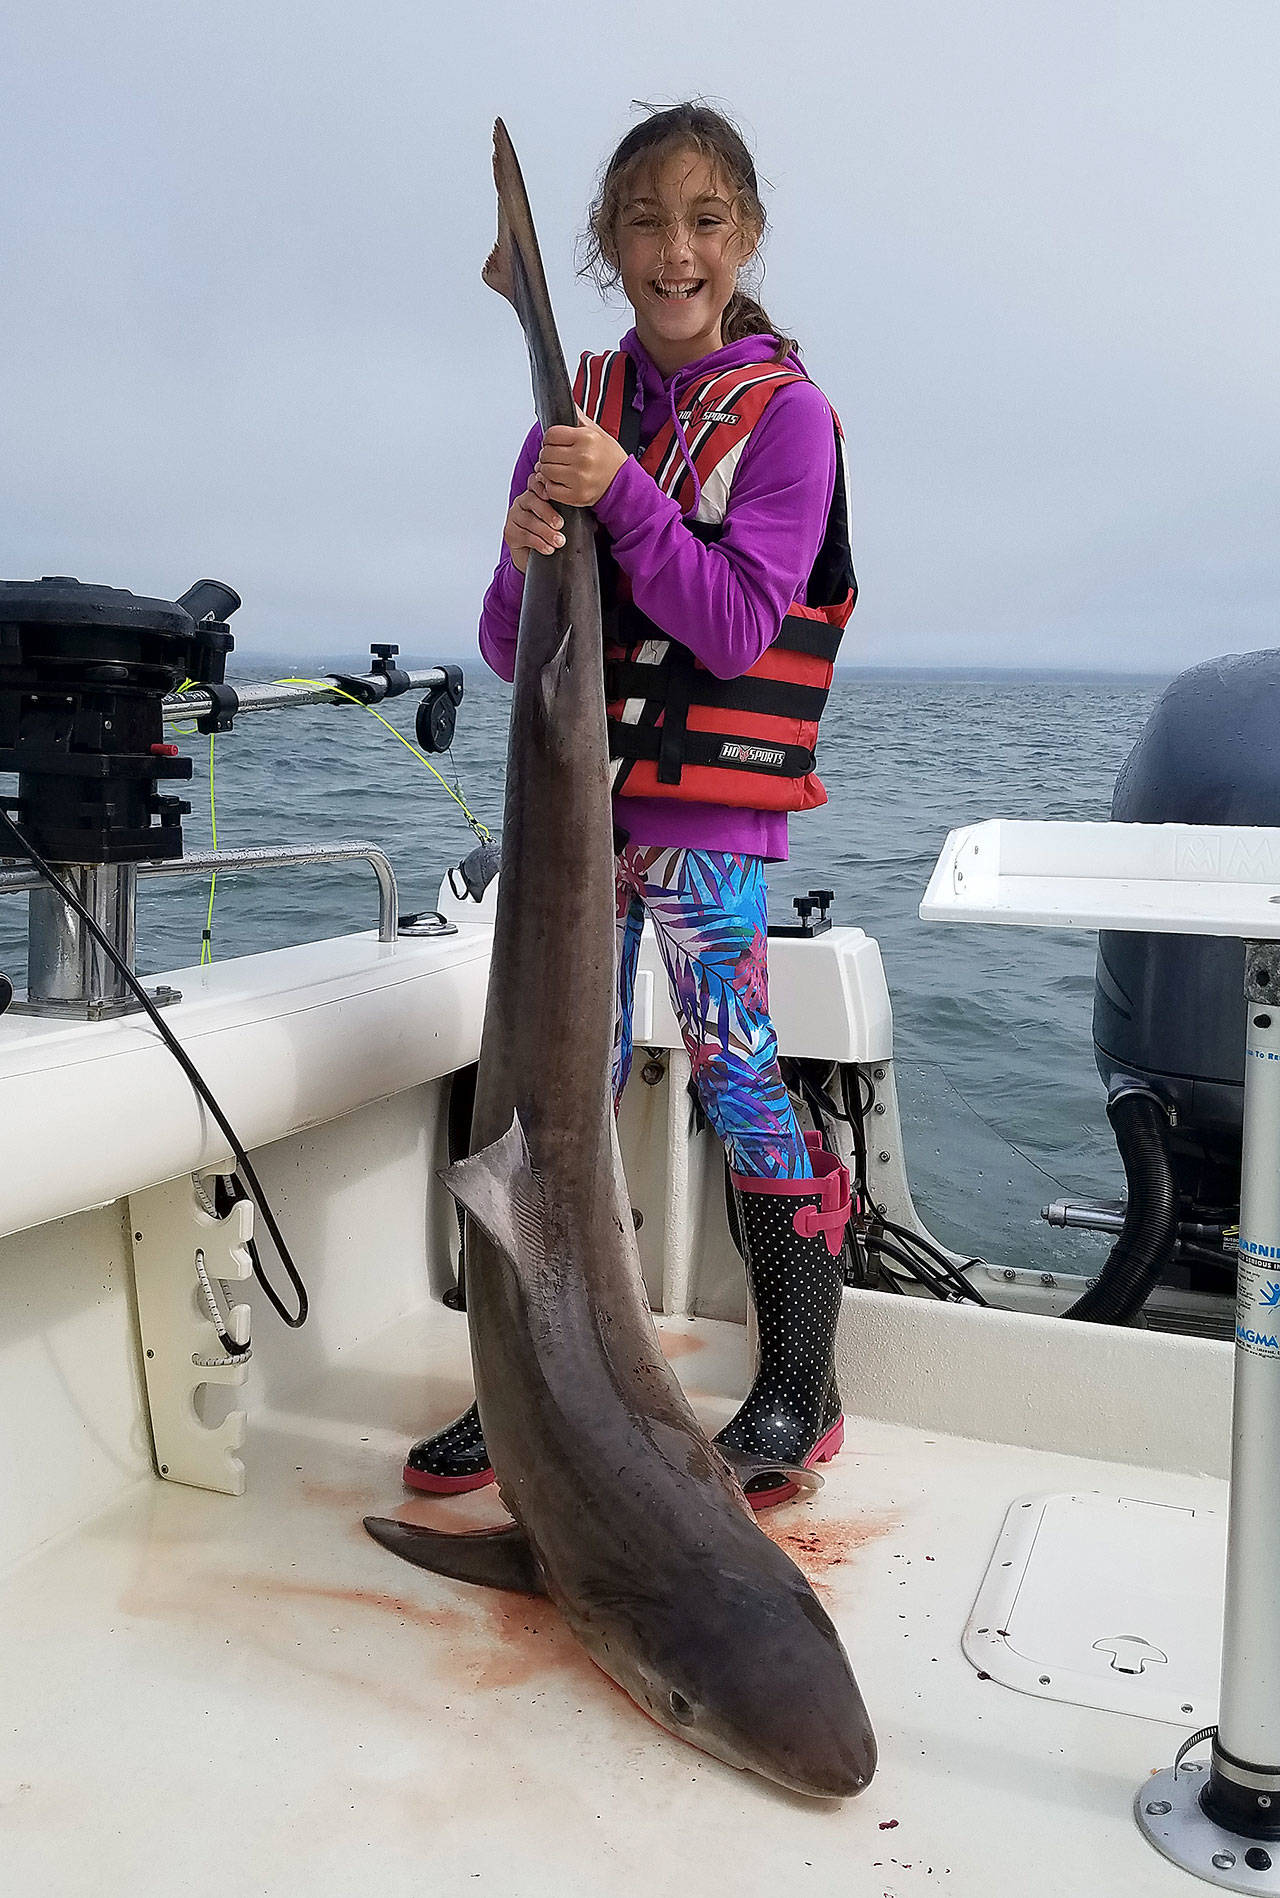 Isabella Tolen of Lake Stevens established a state record when she caught this 41-pound tope shark off the coast of Grays Harbor in late July. (Photo courtesy of WDFW)